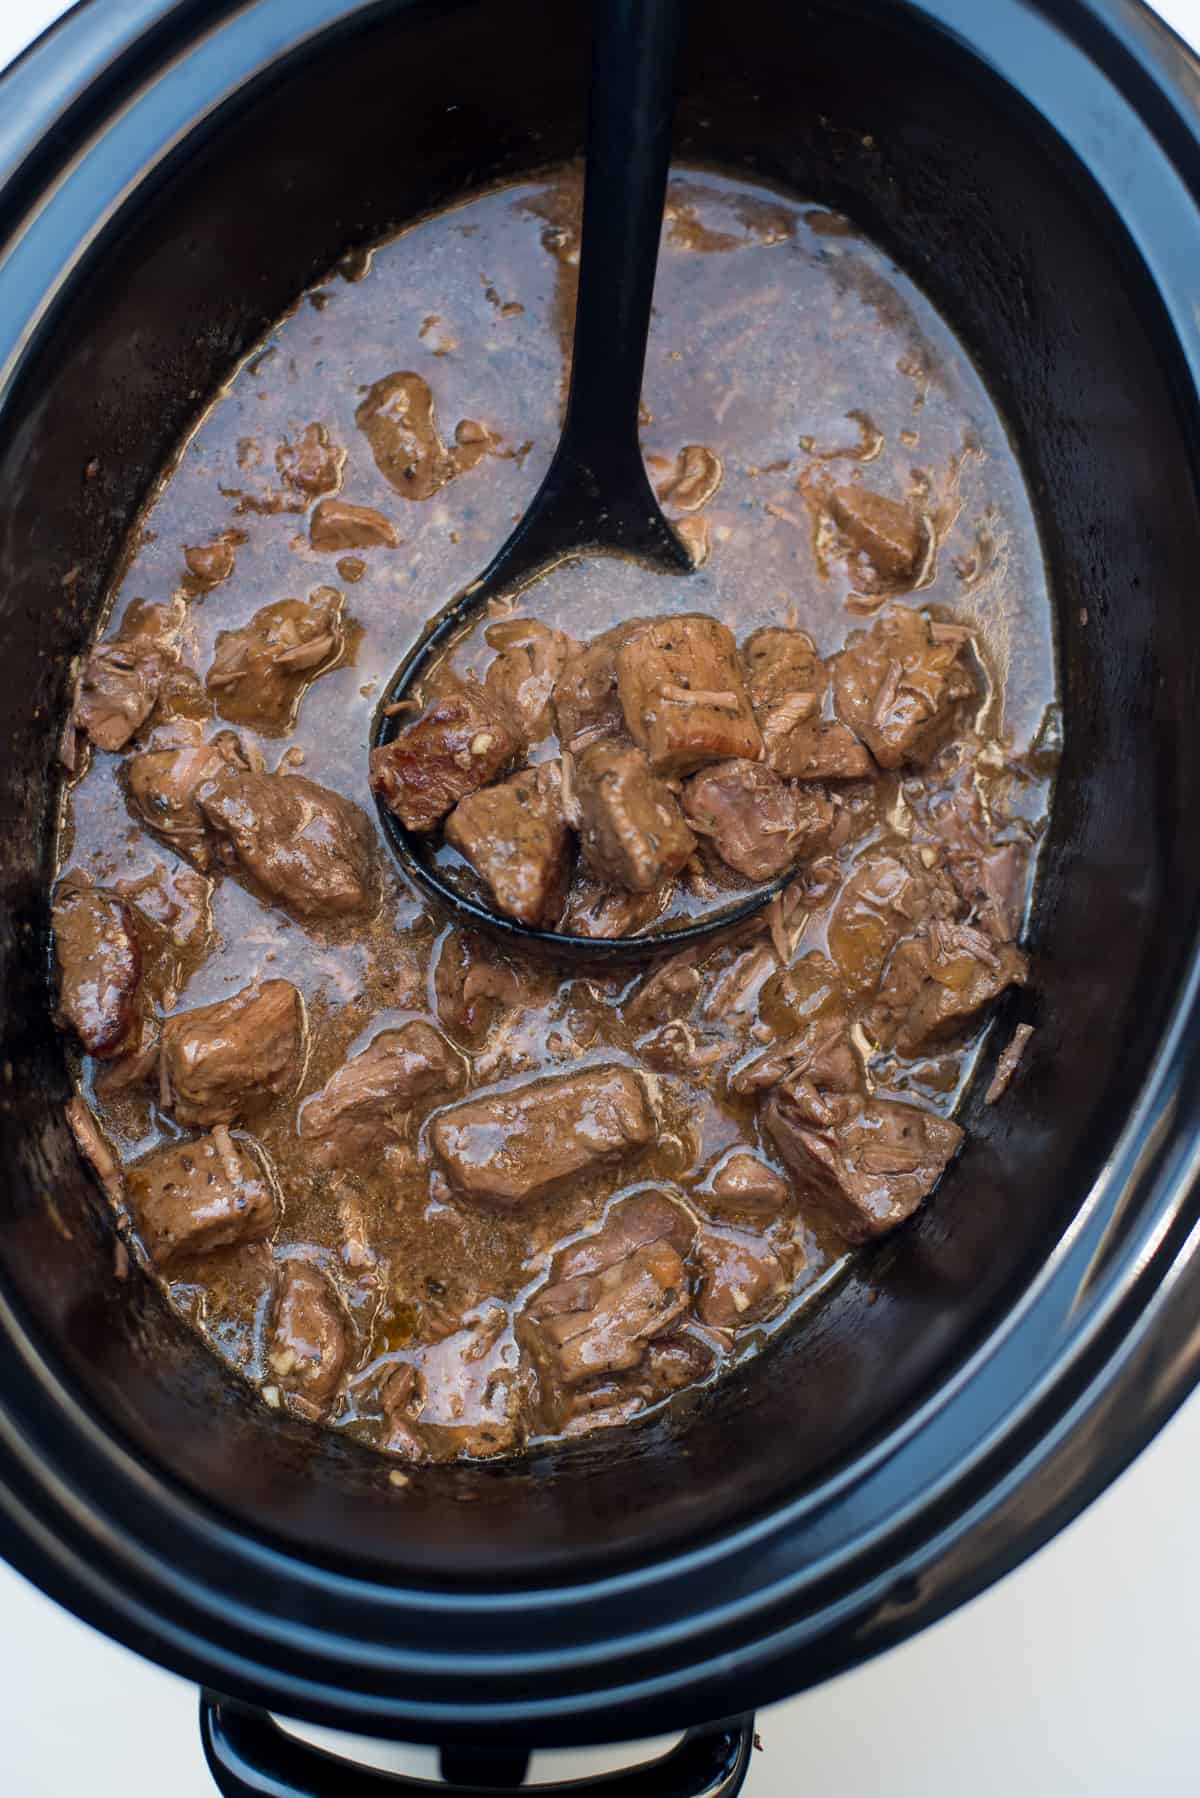 A ladle scooping beef tips with gravy from a slow cooker.